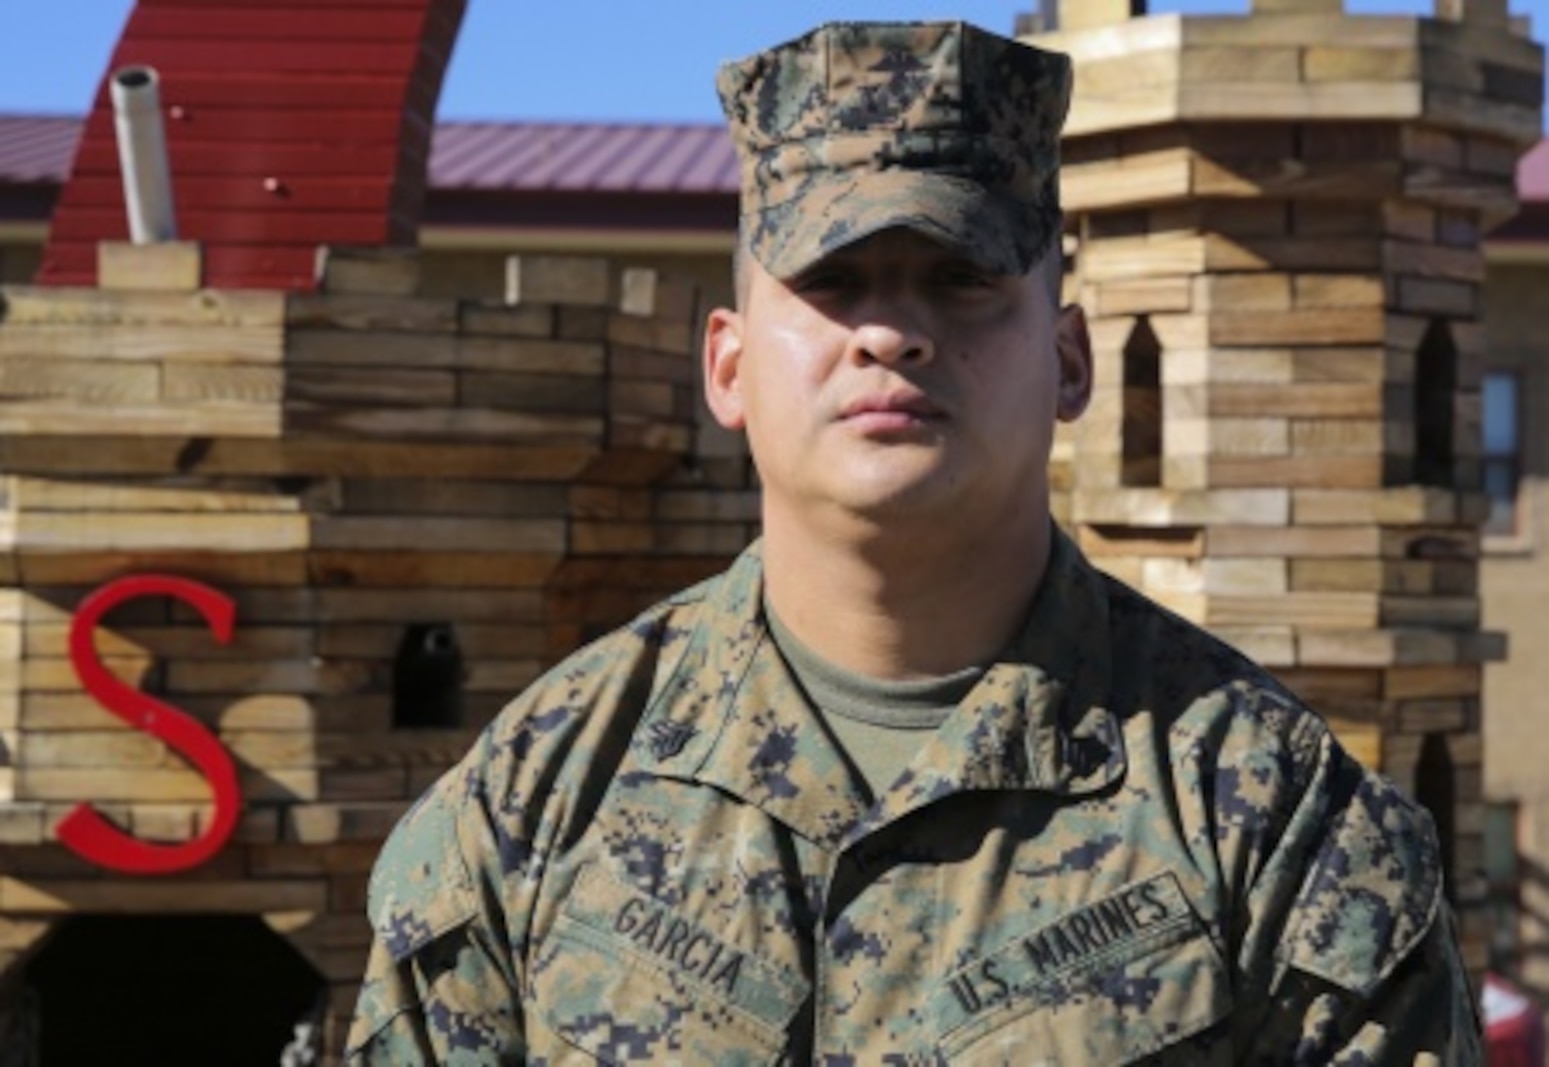 Sgt. Michel Garcia, a heavy equipment mechanic with 7th Engineer Support Battalion, has been a Marine for more than eight years. Garcia, a native of Newport News, Va., has aspirations of becoming a drill instructor and someday shaping new Marines.